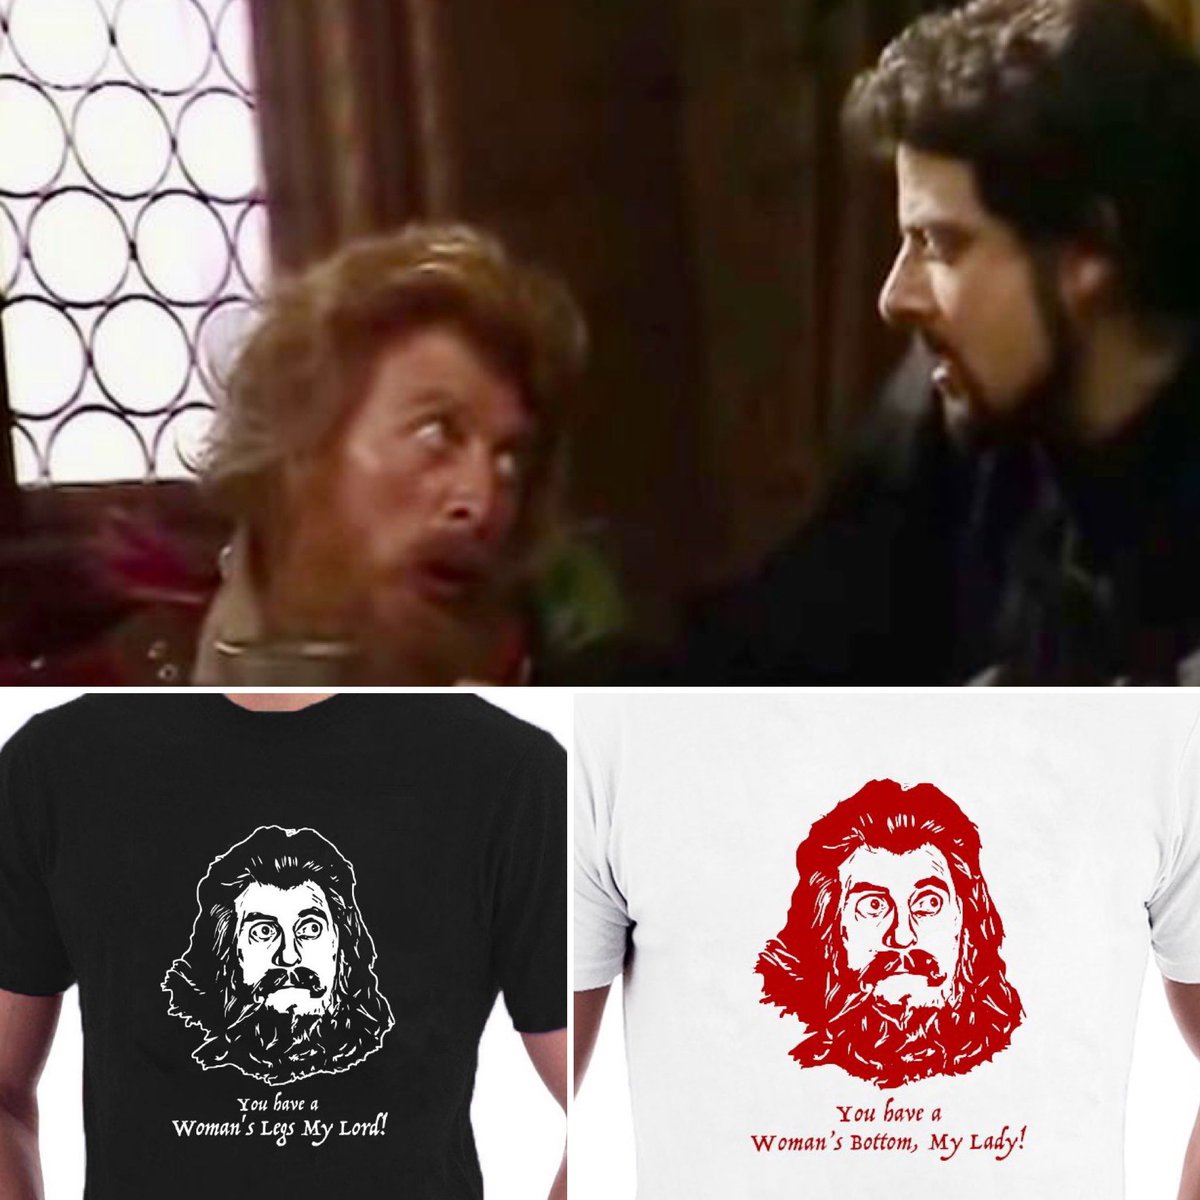 So! You don't know the way to Rwanda EITHER!?!? #Blackadder #CaptainRum #GrantShapps @grantshapps @EatKnuckleFritz @sincesixaneagle @robbacrab @Kensington_Gore @pitchblacksteed Tees by Sillytees bit.ly/3PtvQD6